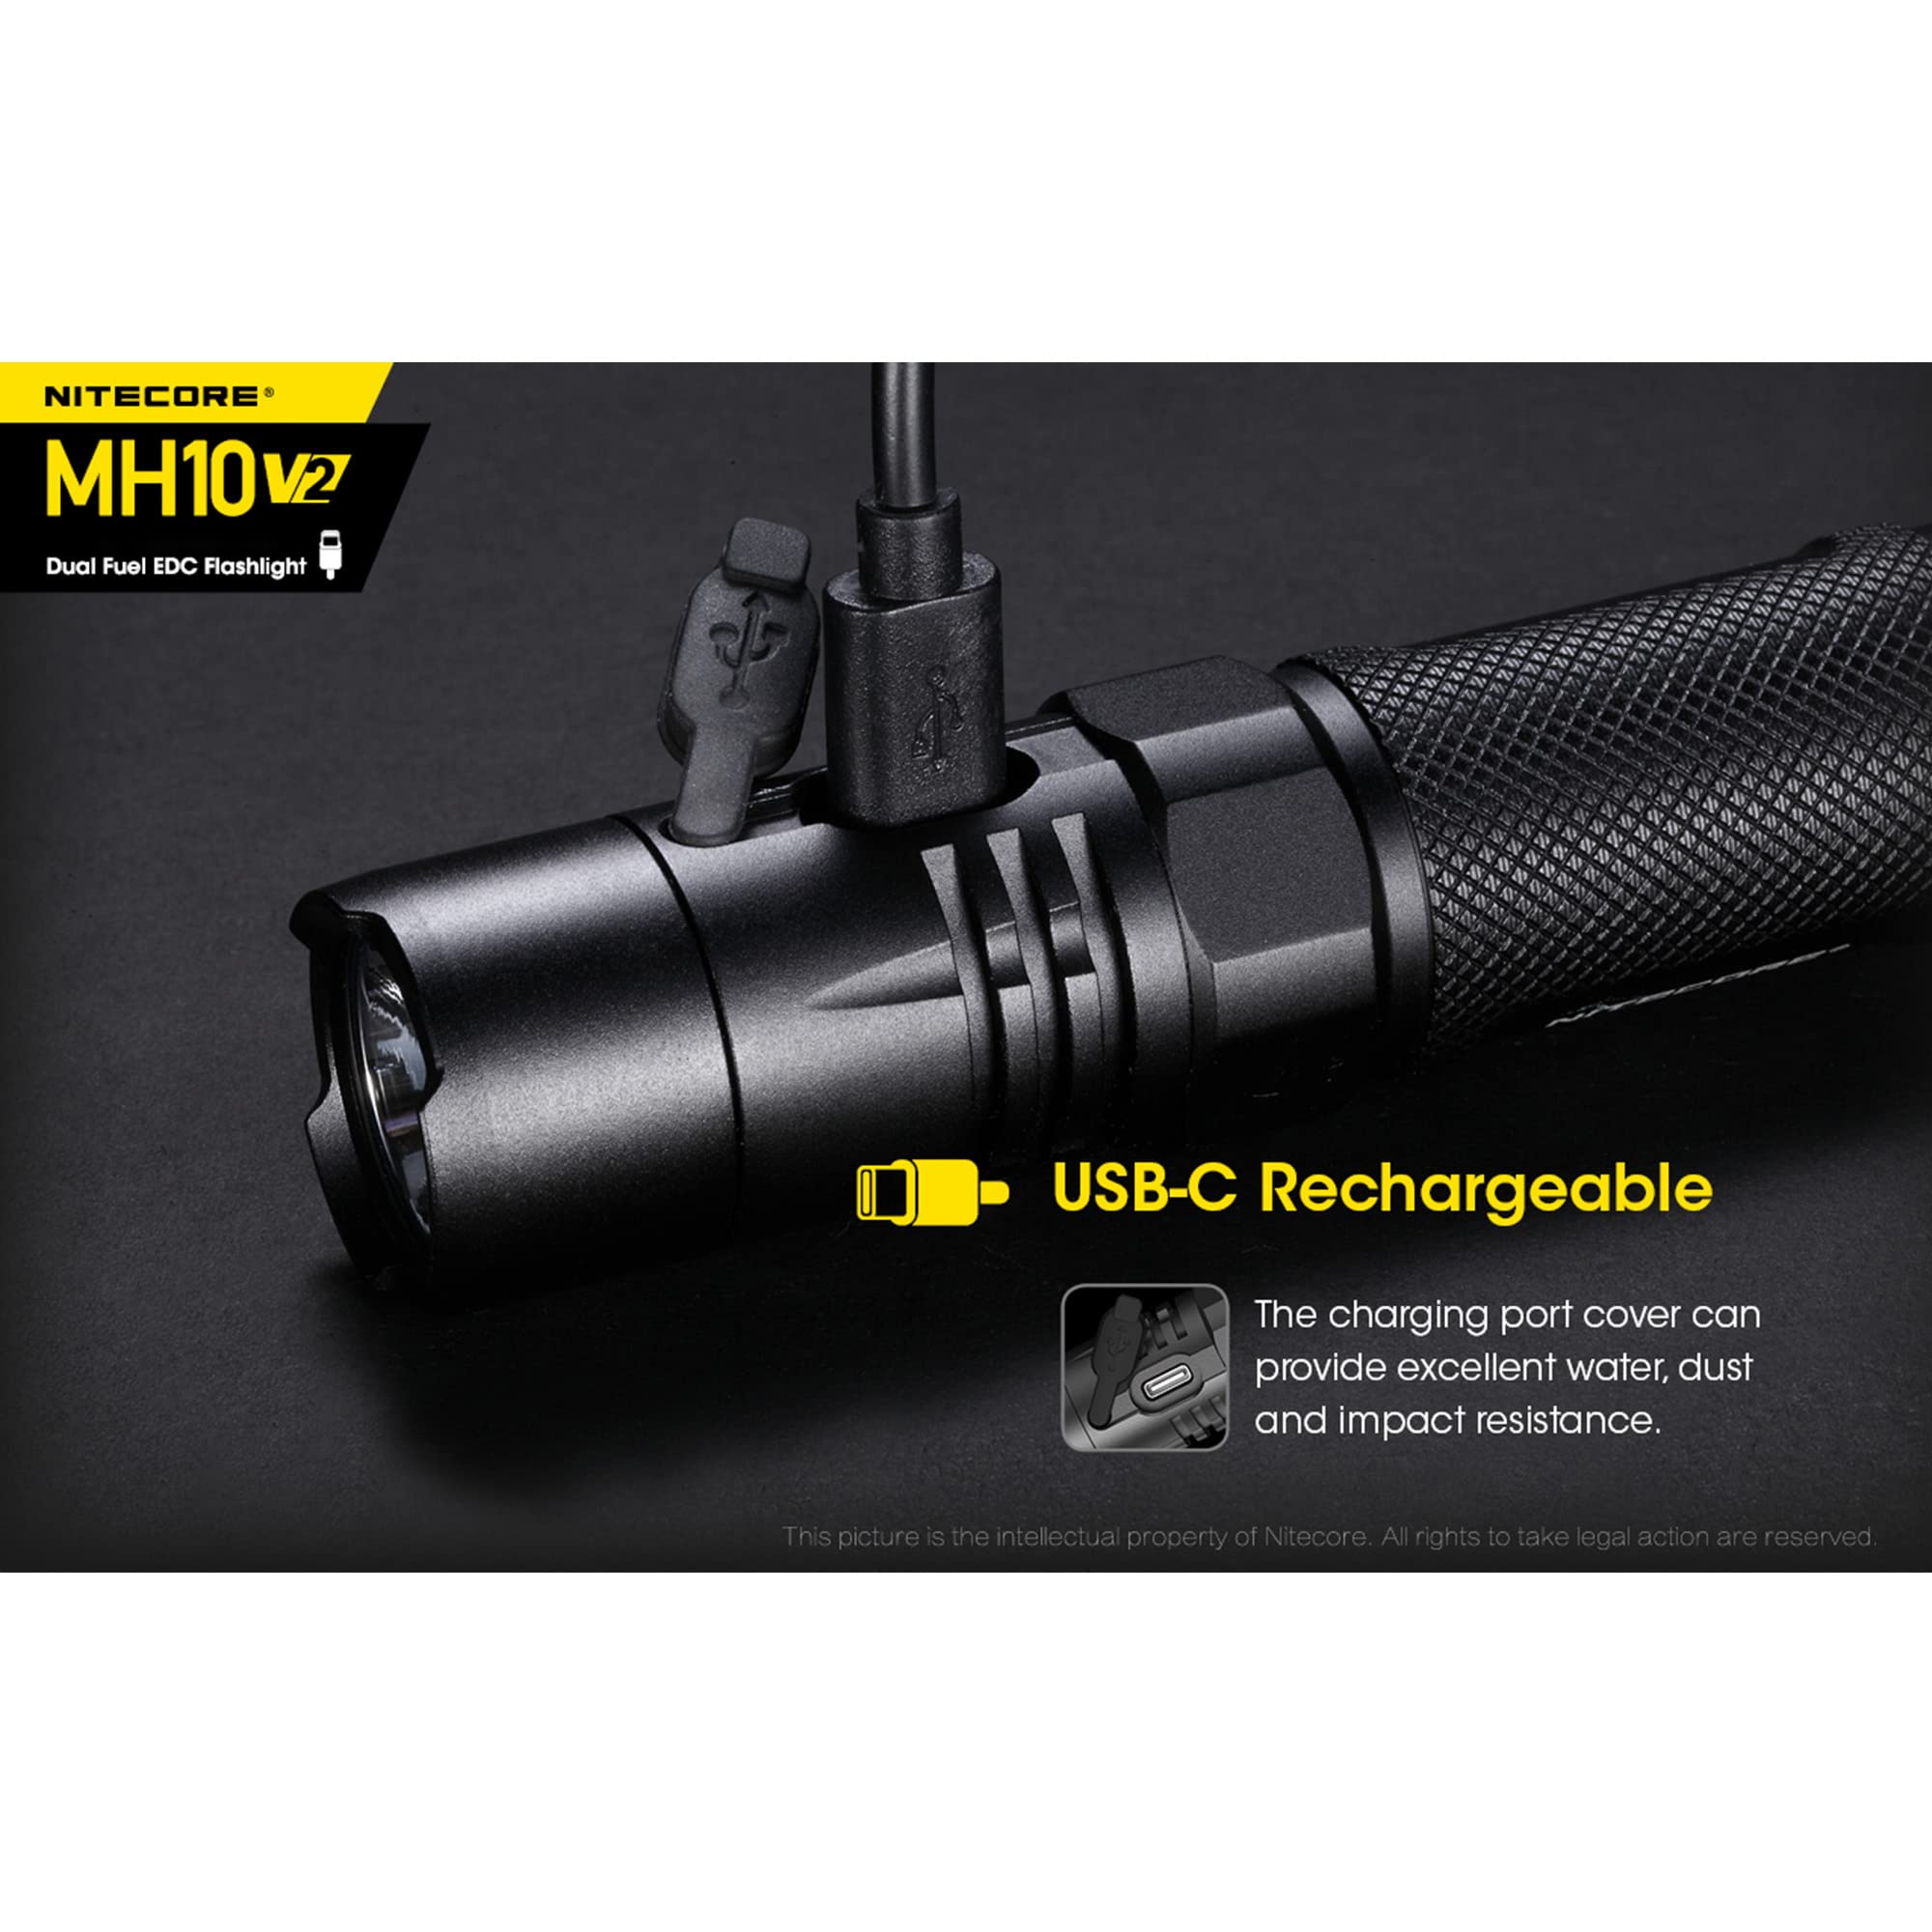 Nitecore MH10 v2 Rechargeable Flashlight, 1200 Lumen LED USB-C Fast Charging Side Switch Compact for EDC Pocket Carry with LumenTac Organizer